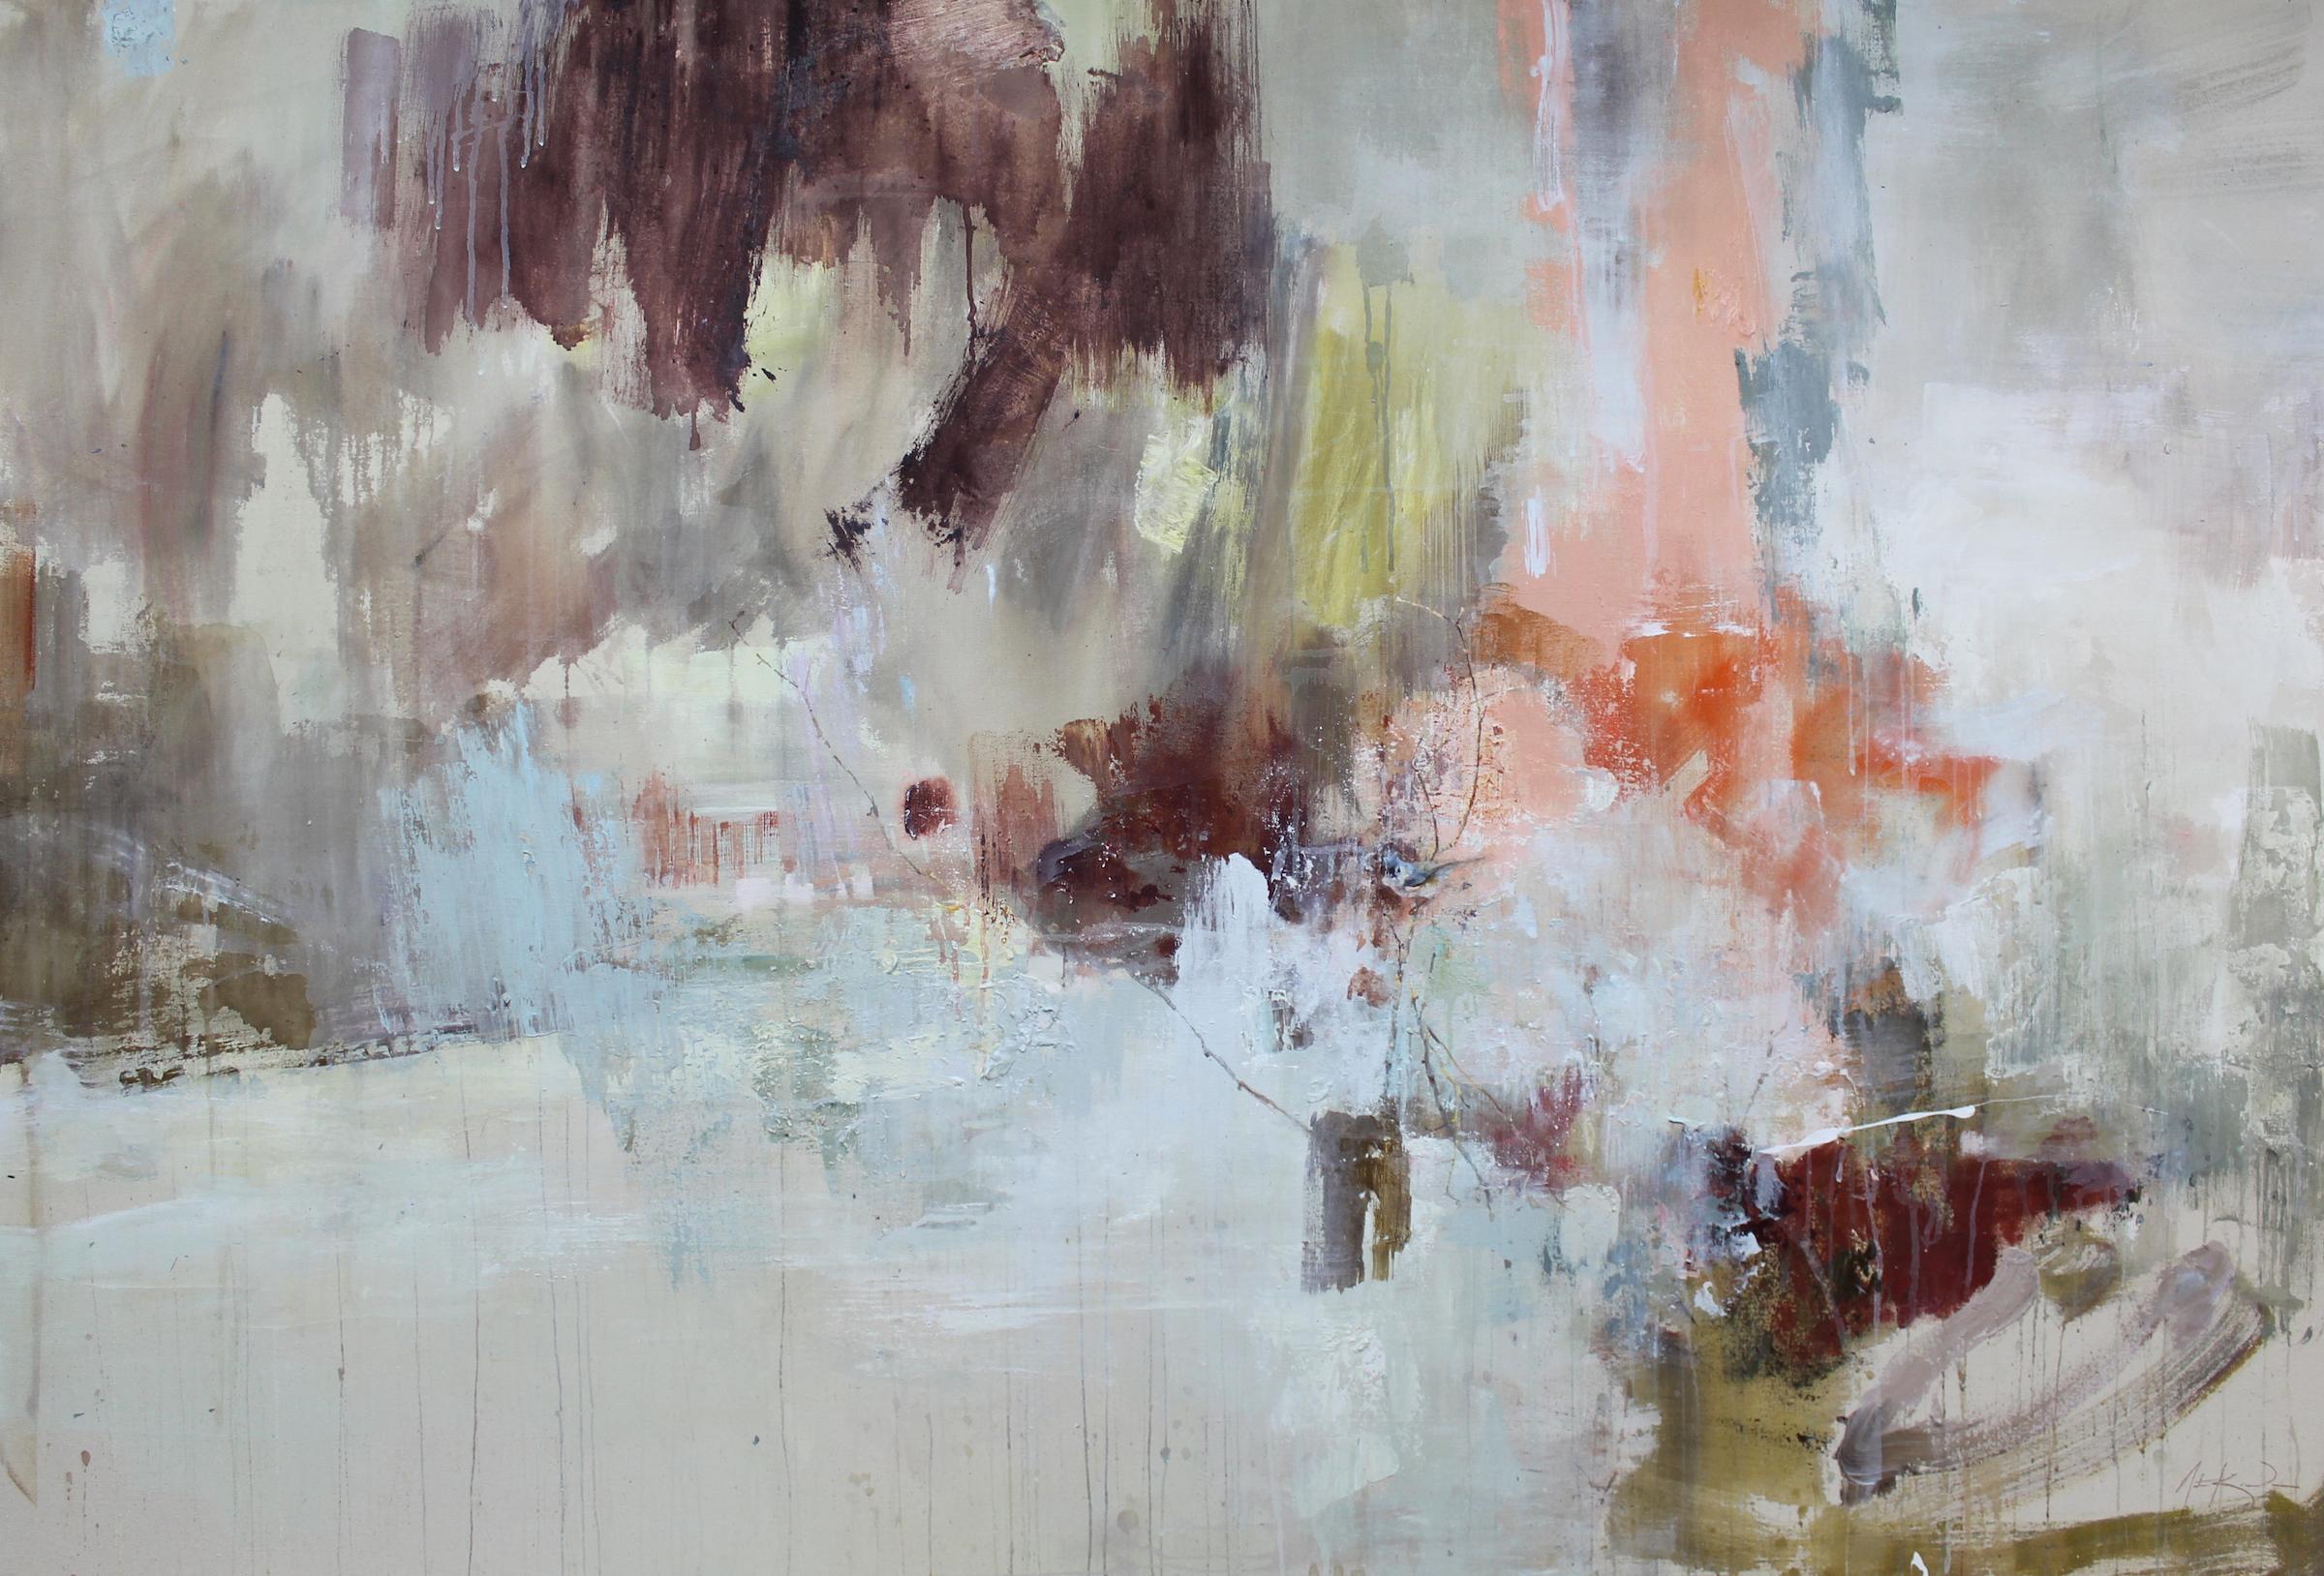 'Hoping for the Moment (Tufted Titmouse)' is a large horizontal mixed media on canvas abstract painting created by American artist Justin Kellner in 2019. Featuring a palette made of grey, brown, white, soft pink and orange among other tones, the